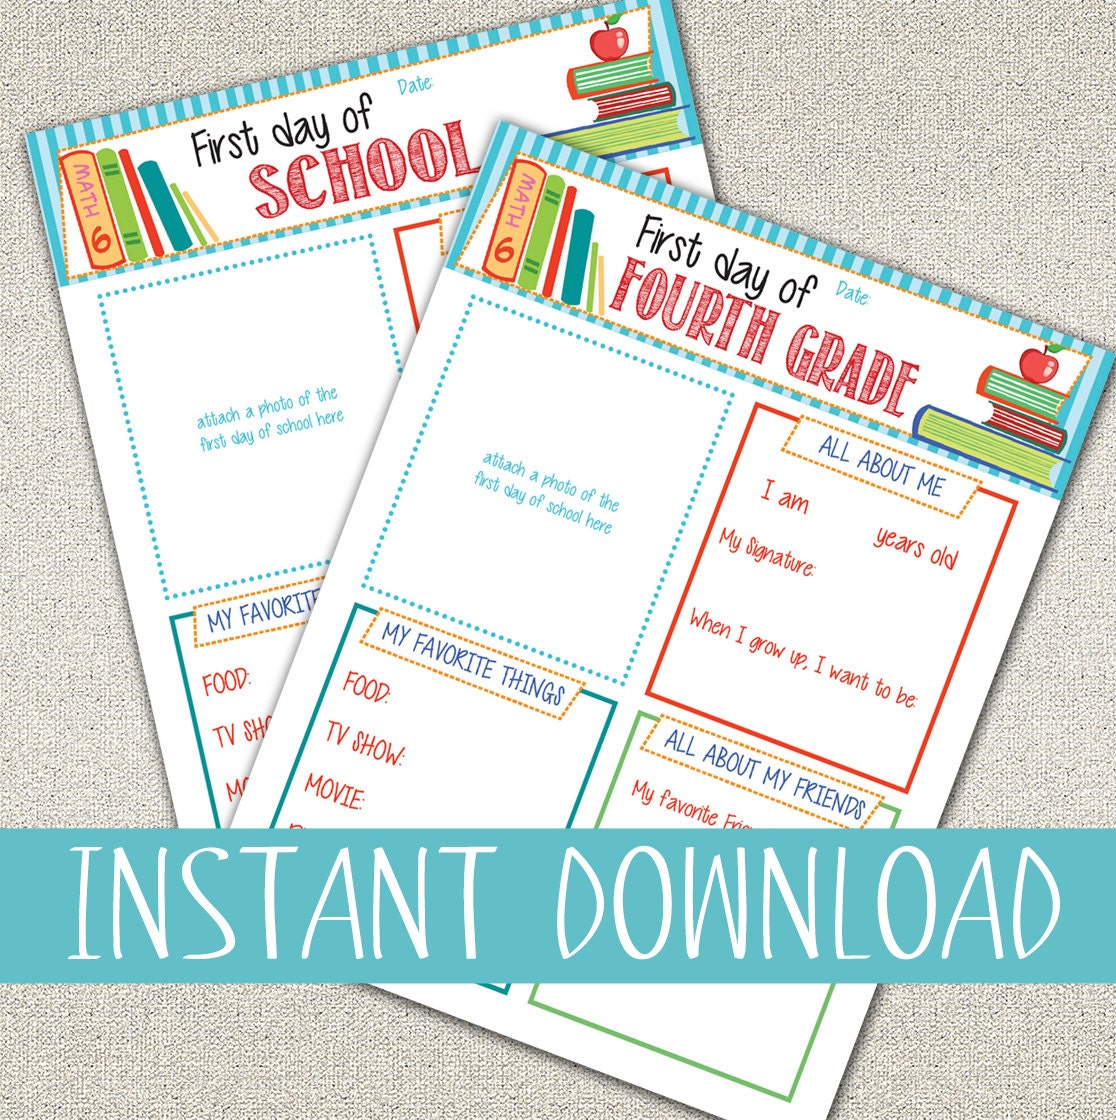 all-about-me-questionnaire-printables-first-day-of-school